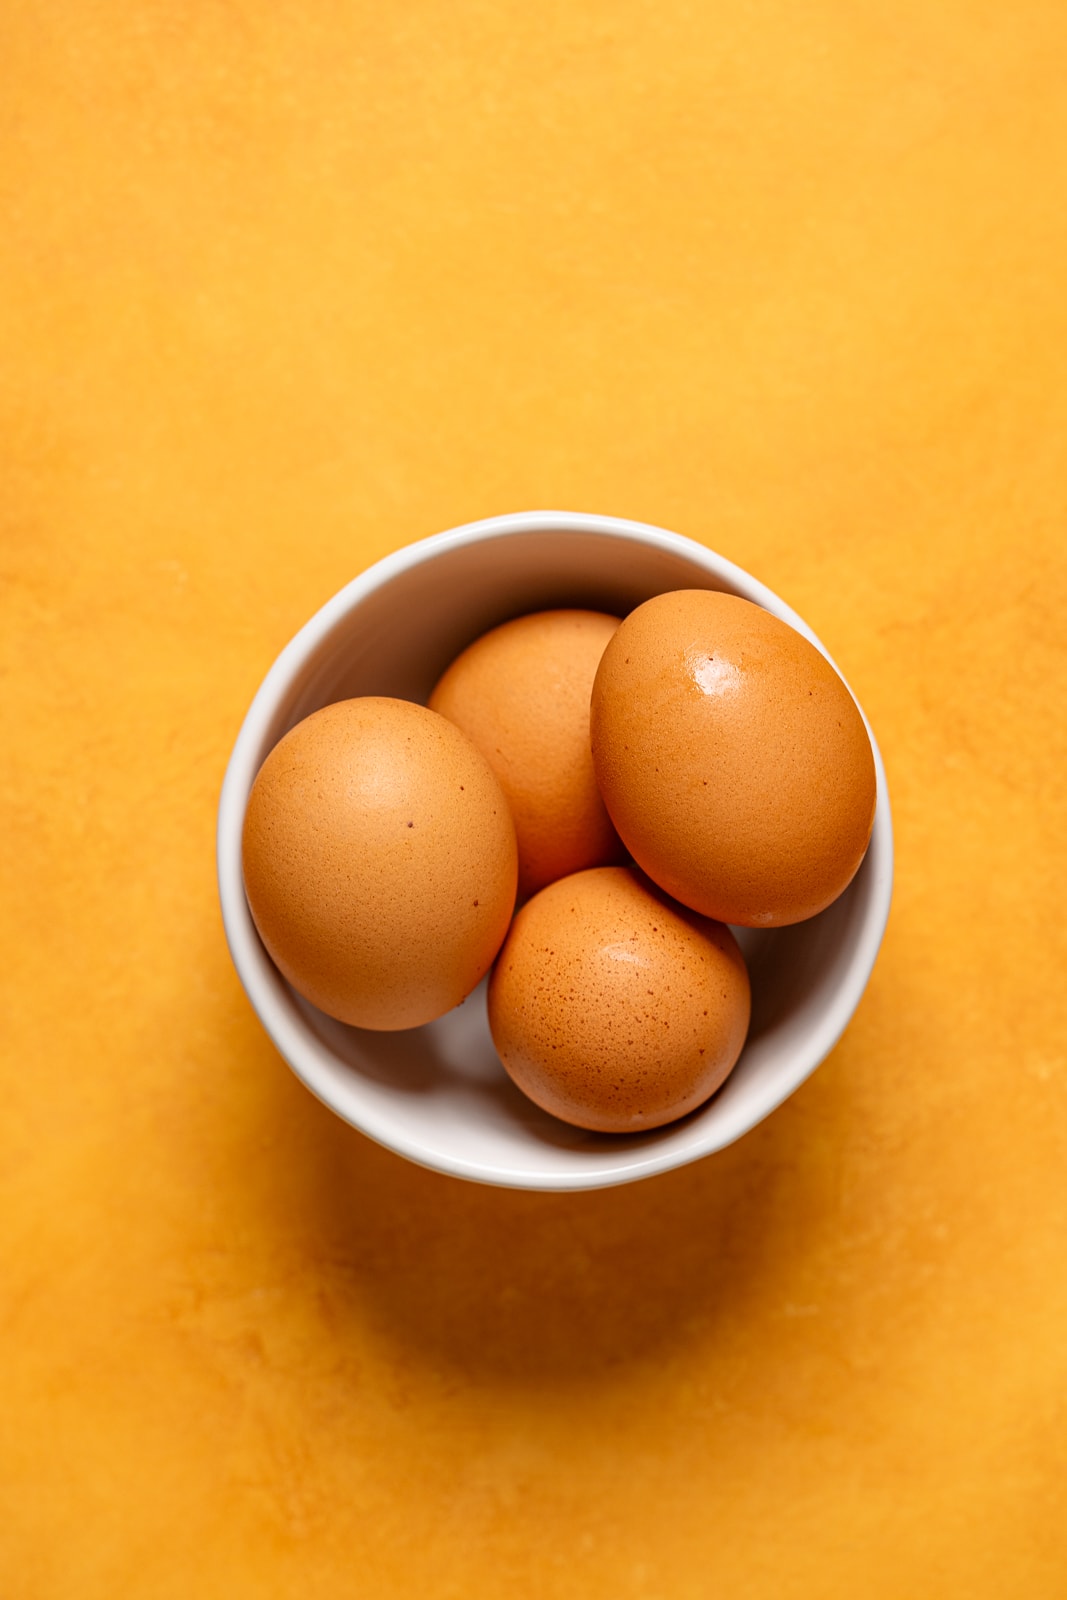 Eggs in a bowl on an orange table.